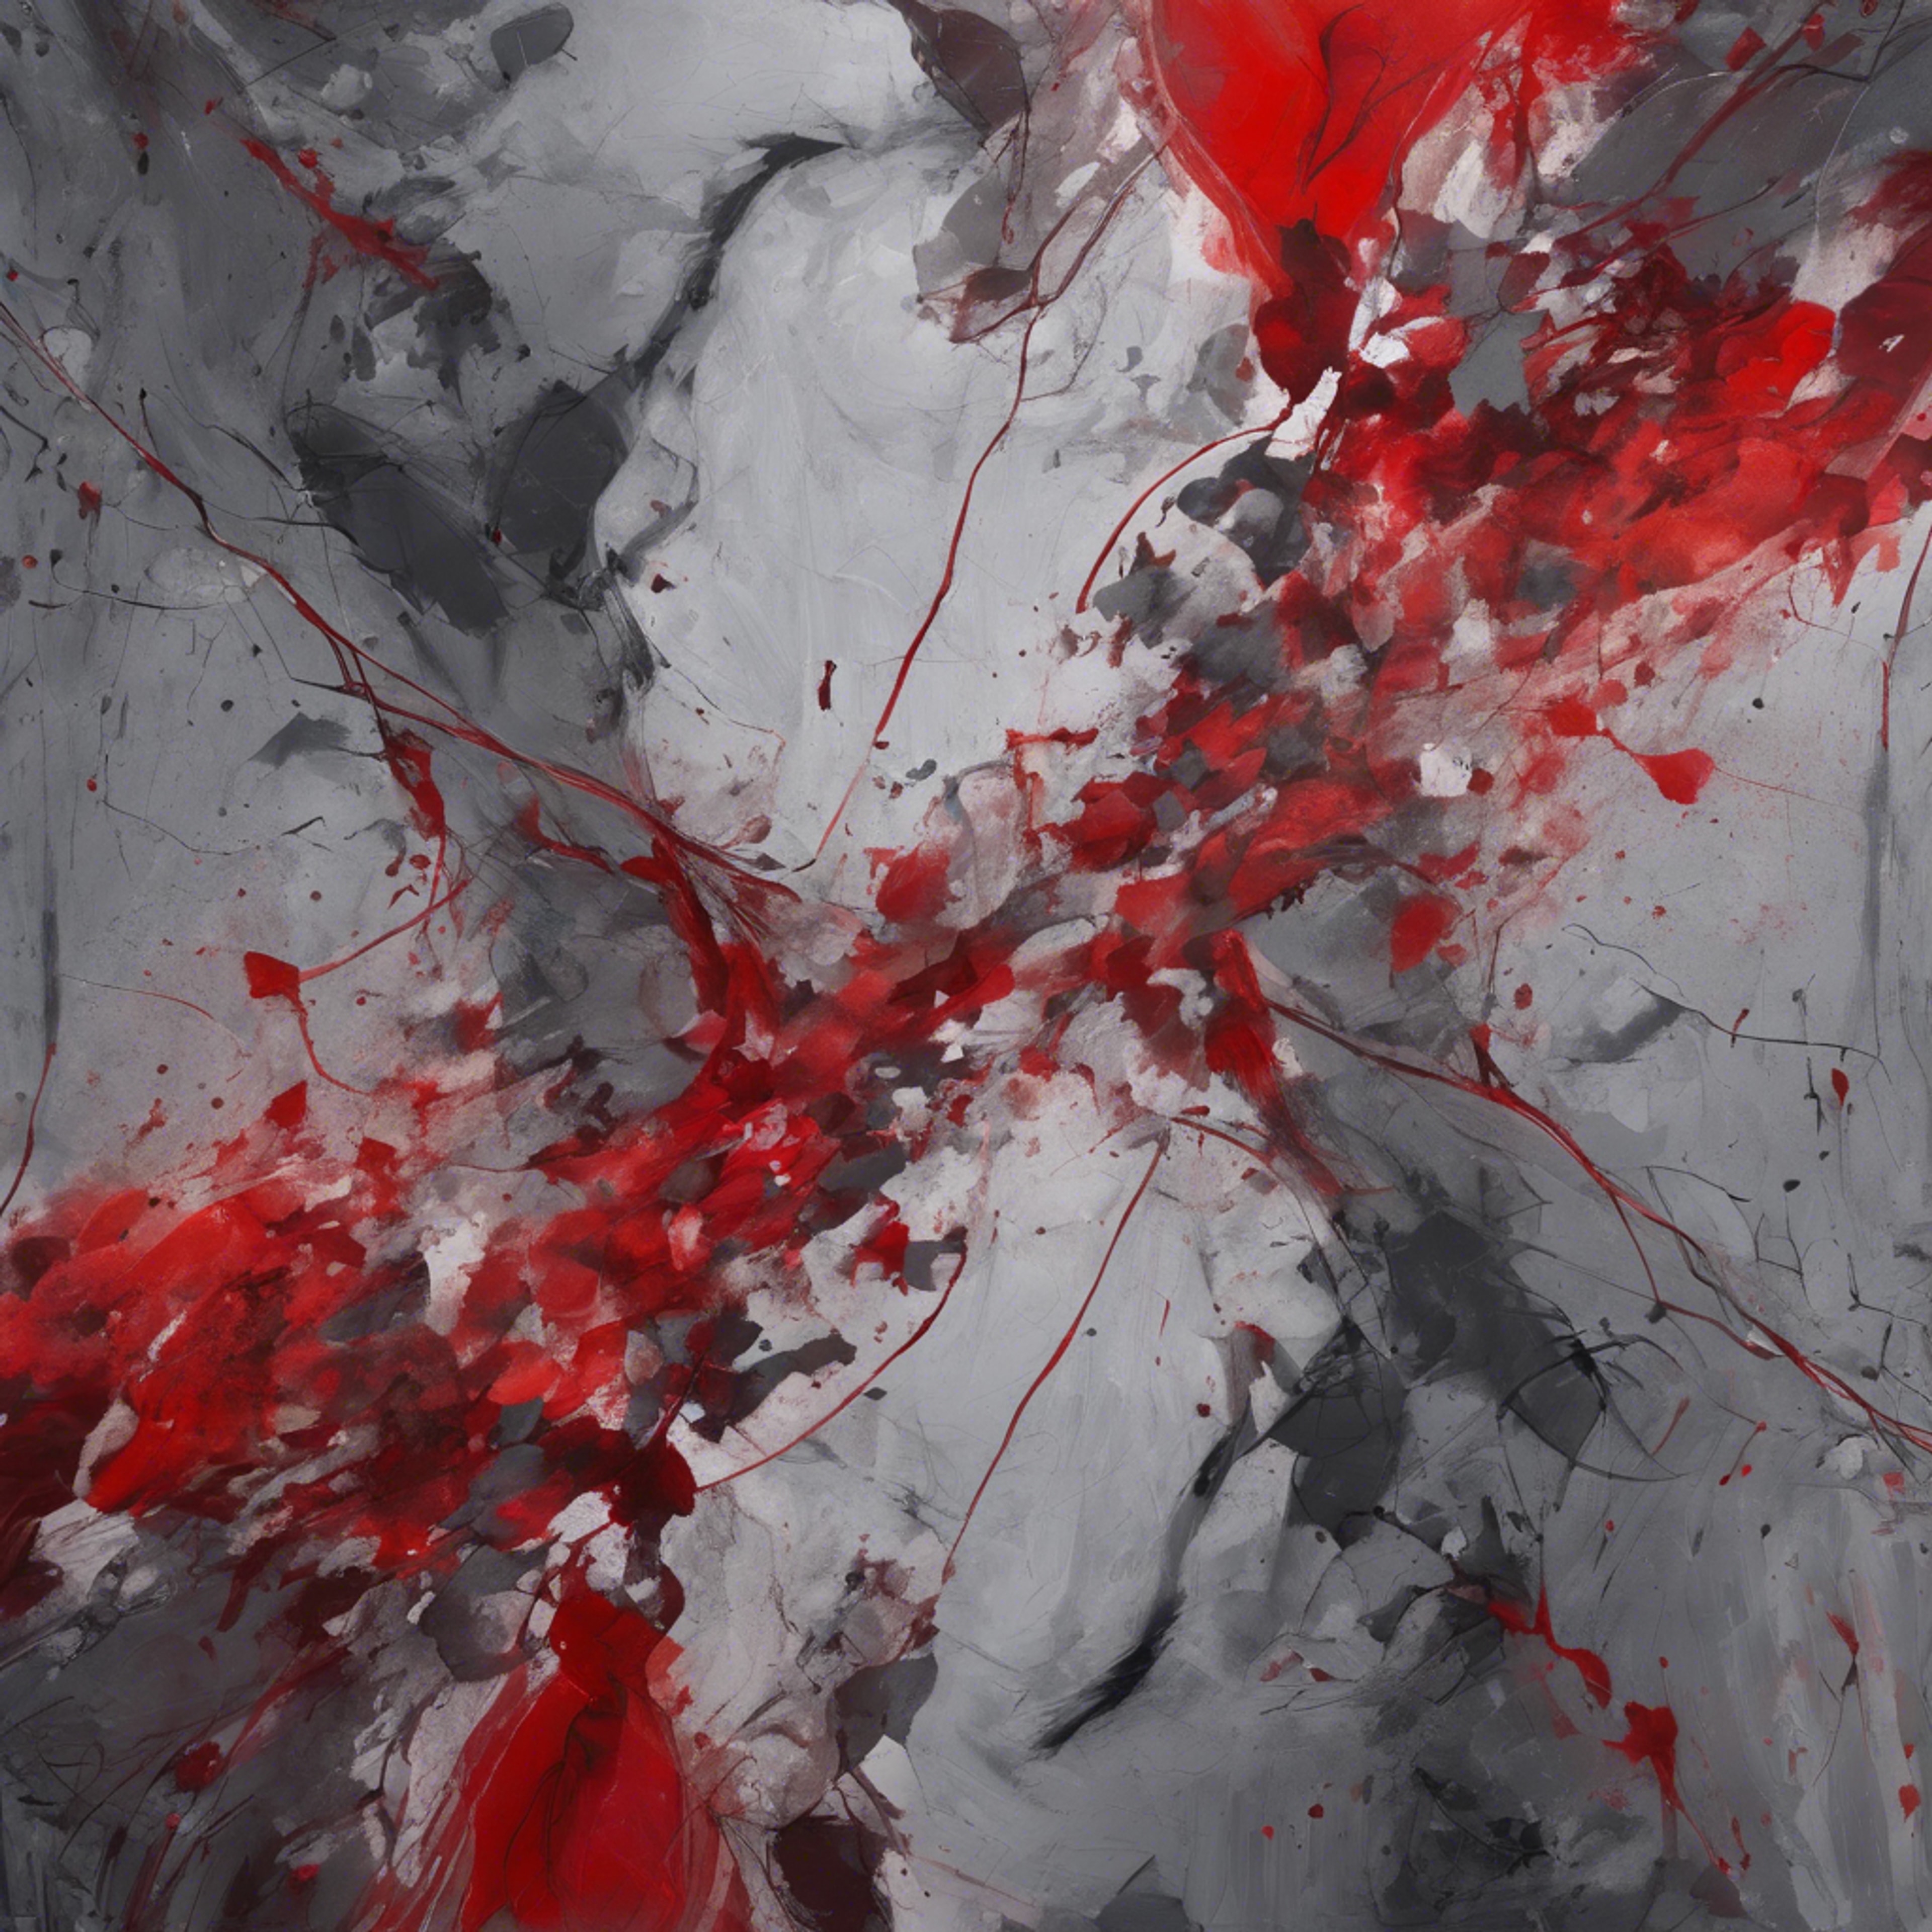 A red and gray abstract painting demonstrating the battle between passion and reason. Tapeta[fb490a5db02d428289d0]